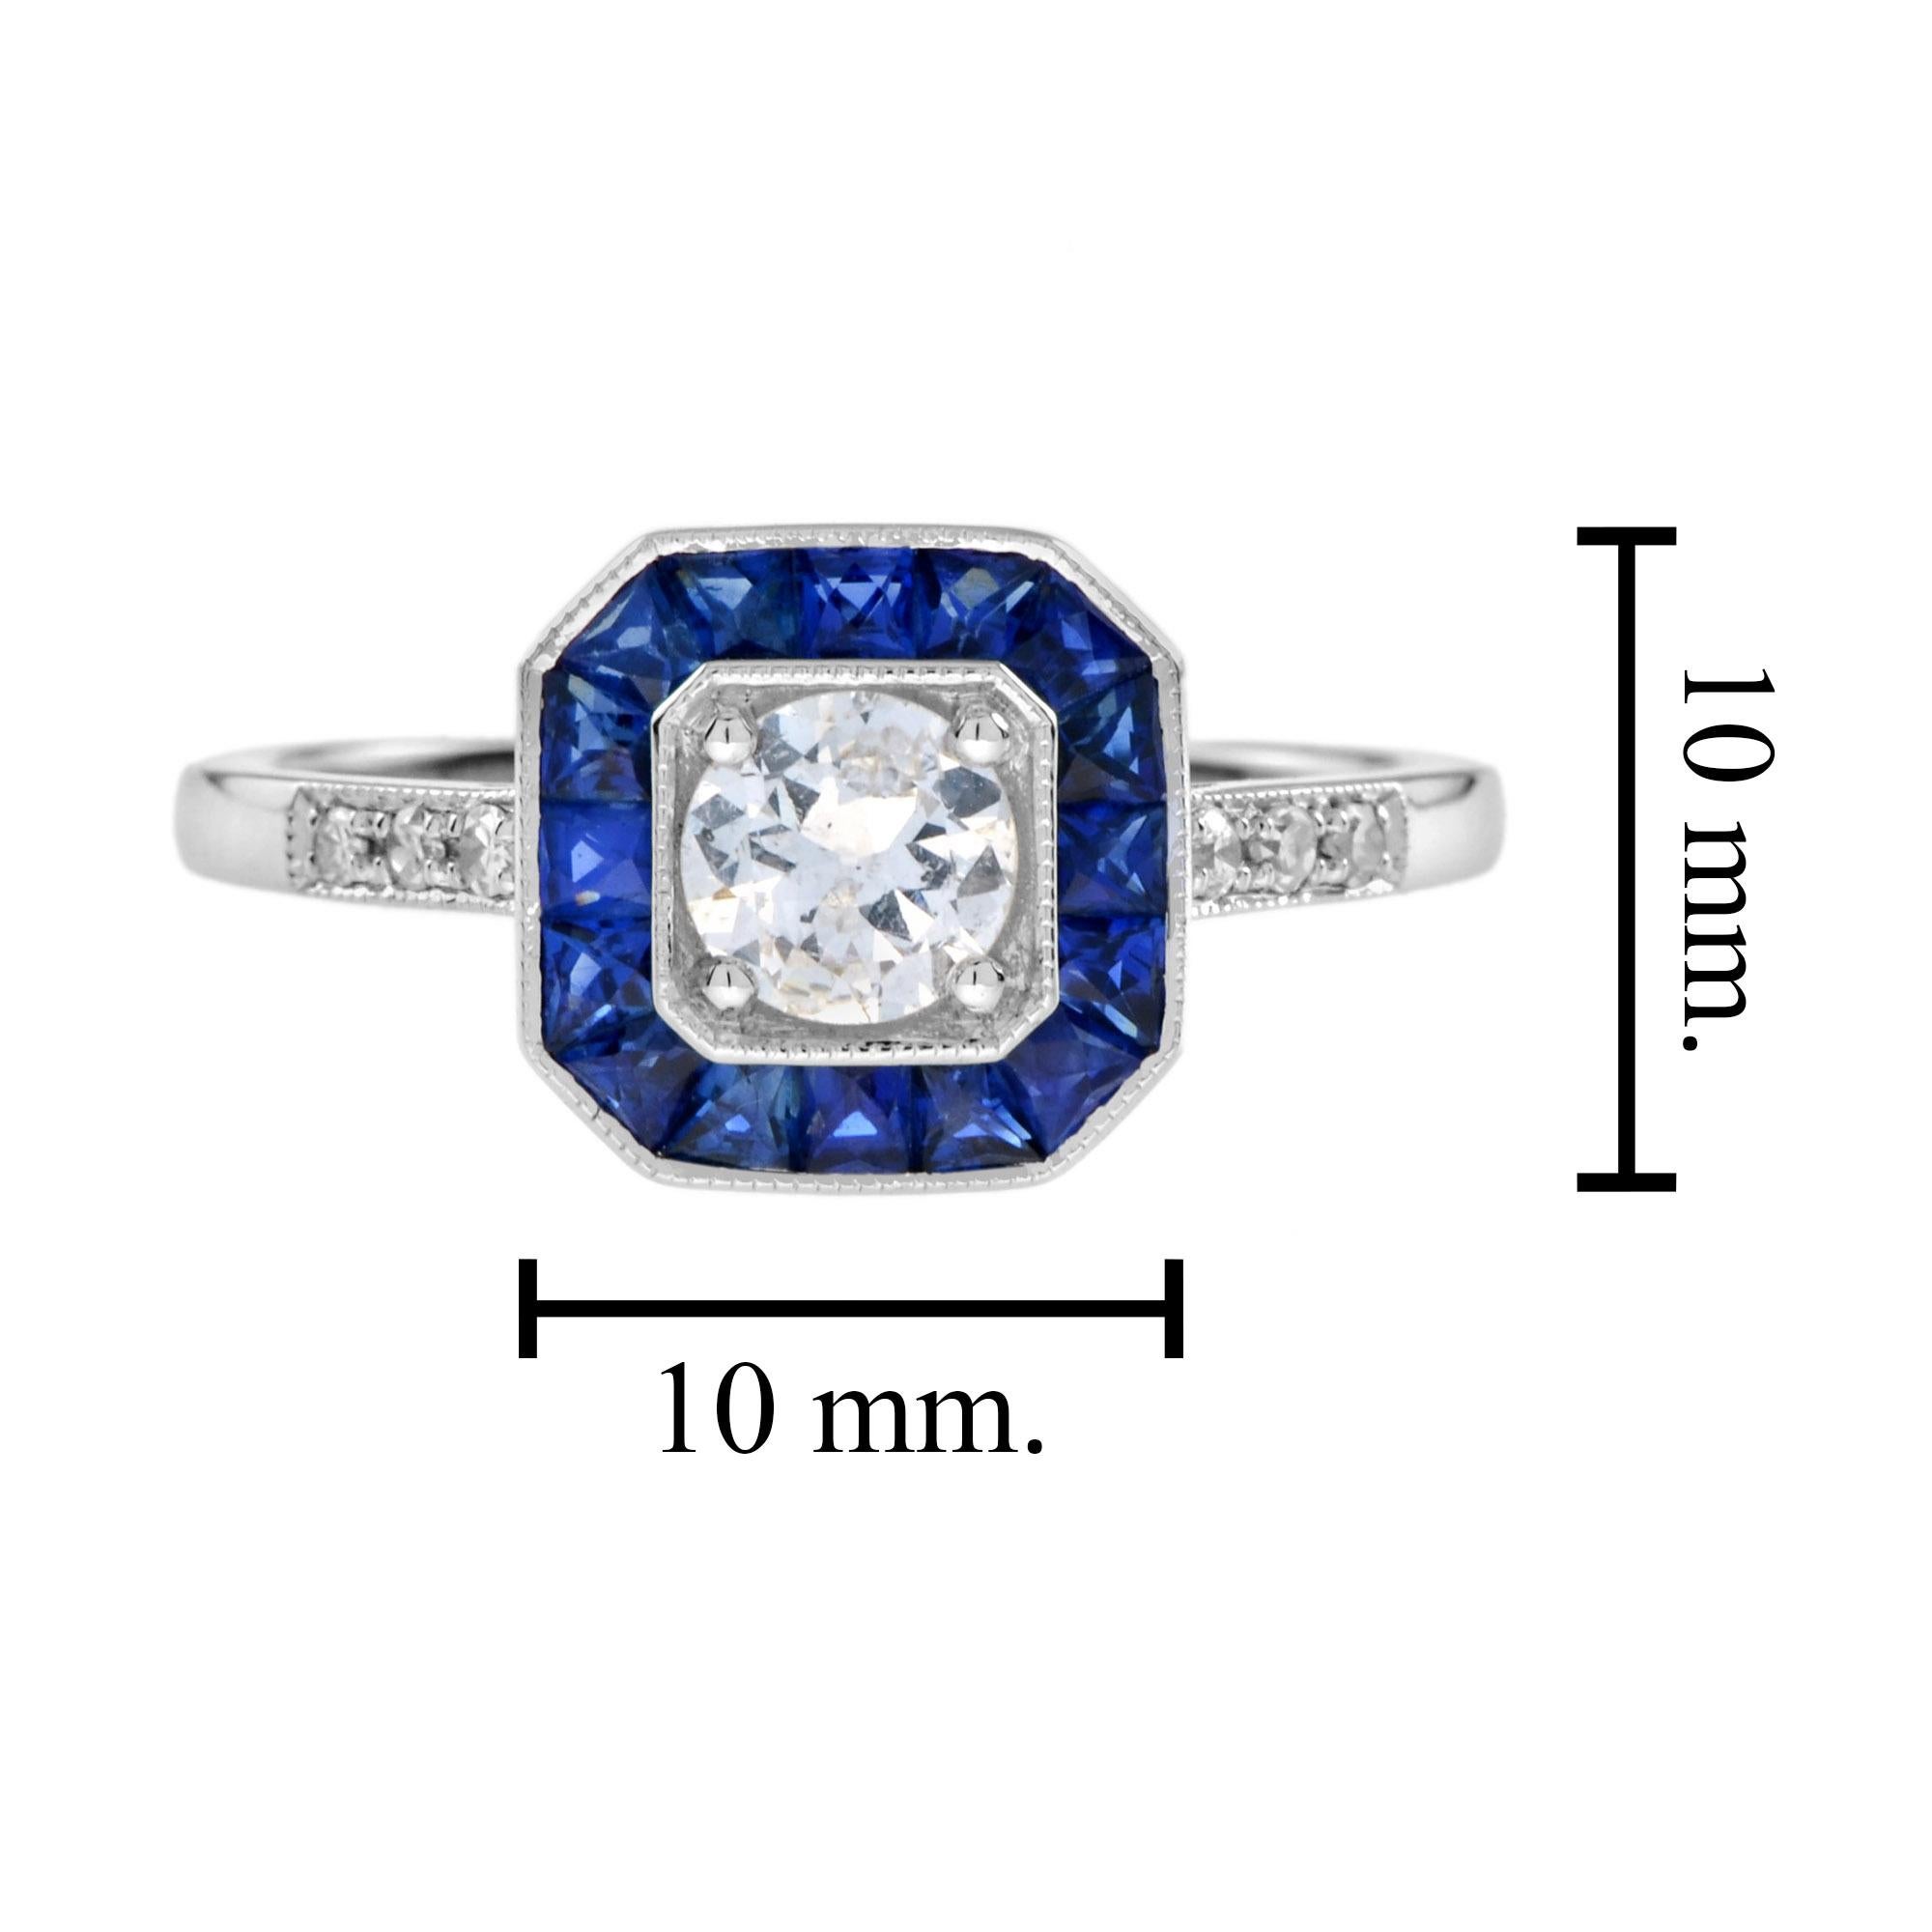 Diamond and Sapphire Art Deco Style Engagement Ring in 18K White Gold For Sale 1